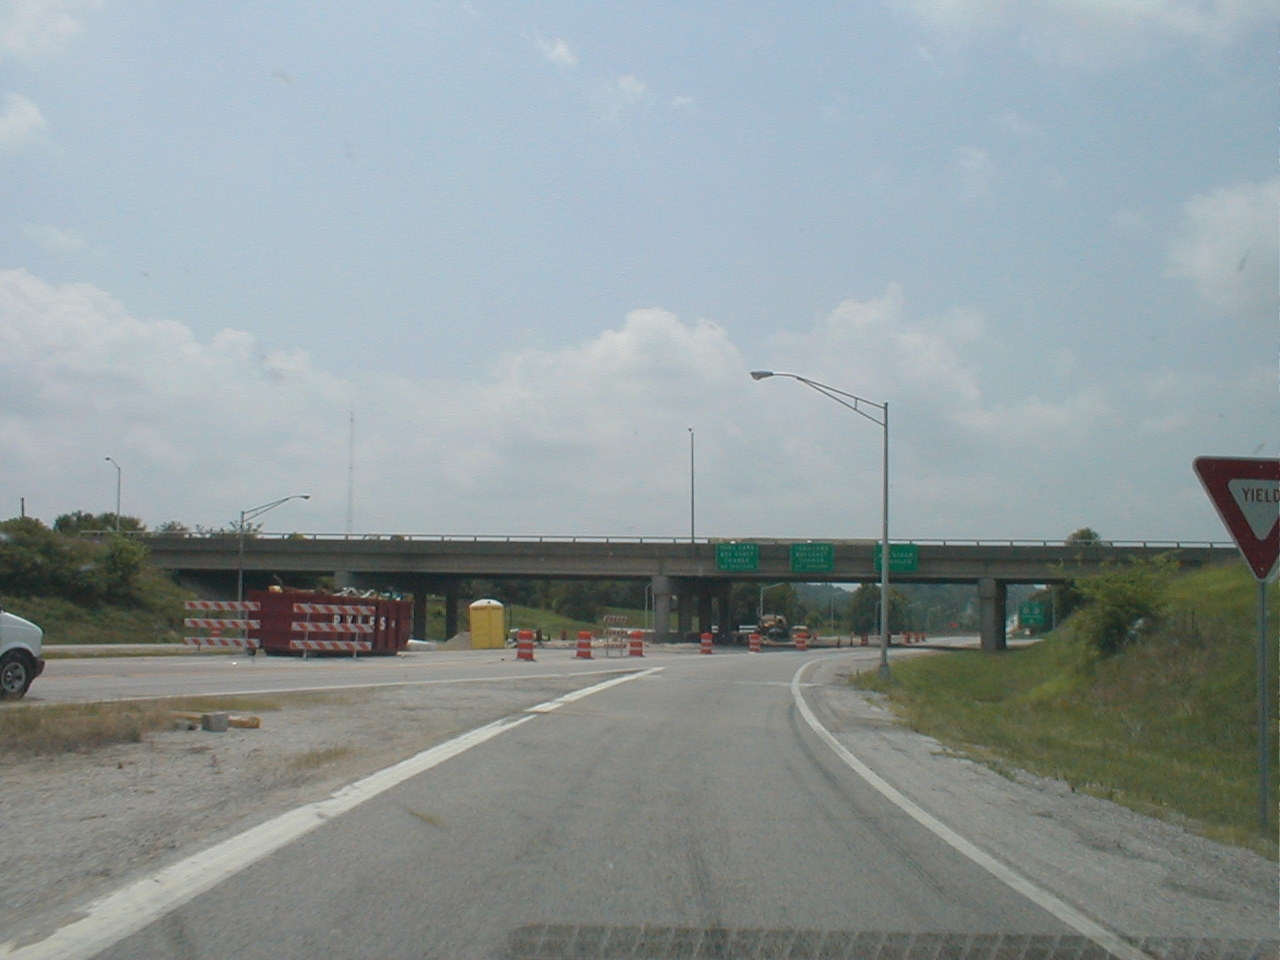 Construction to remove the toll booths at Exit 27.